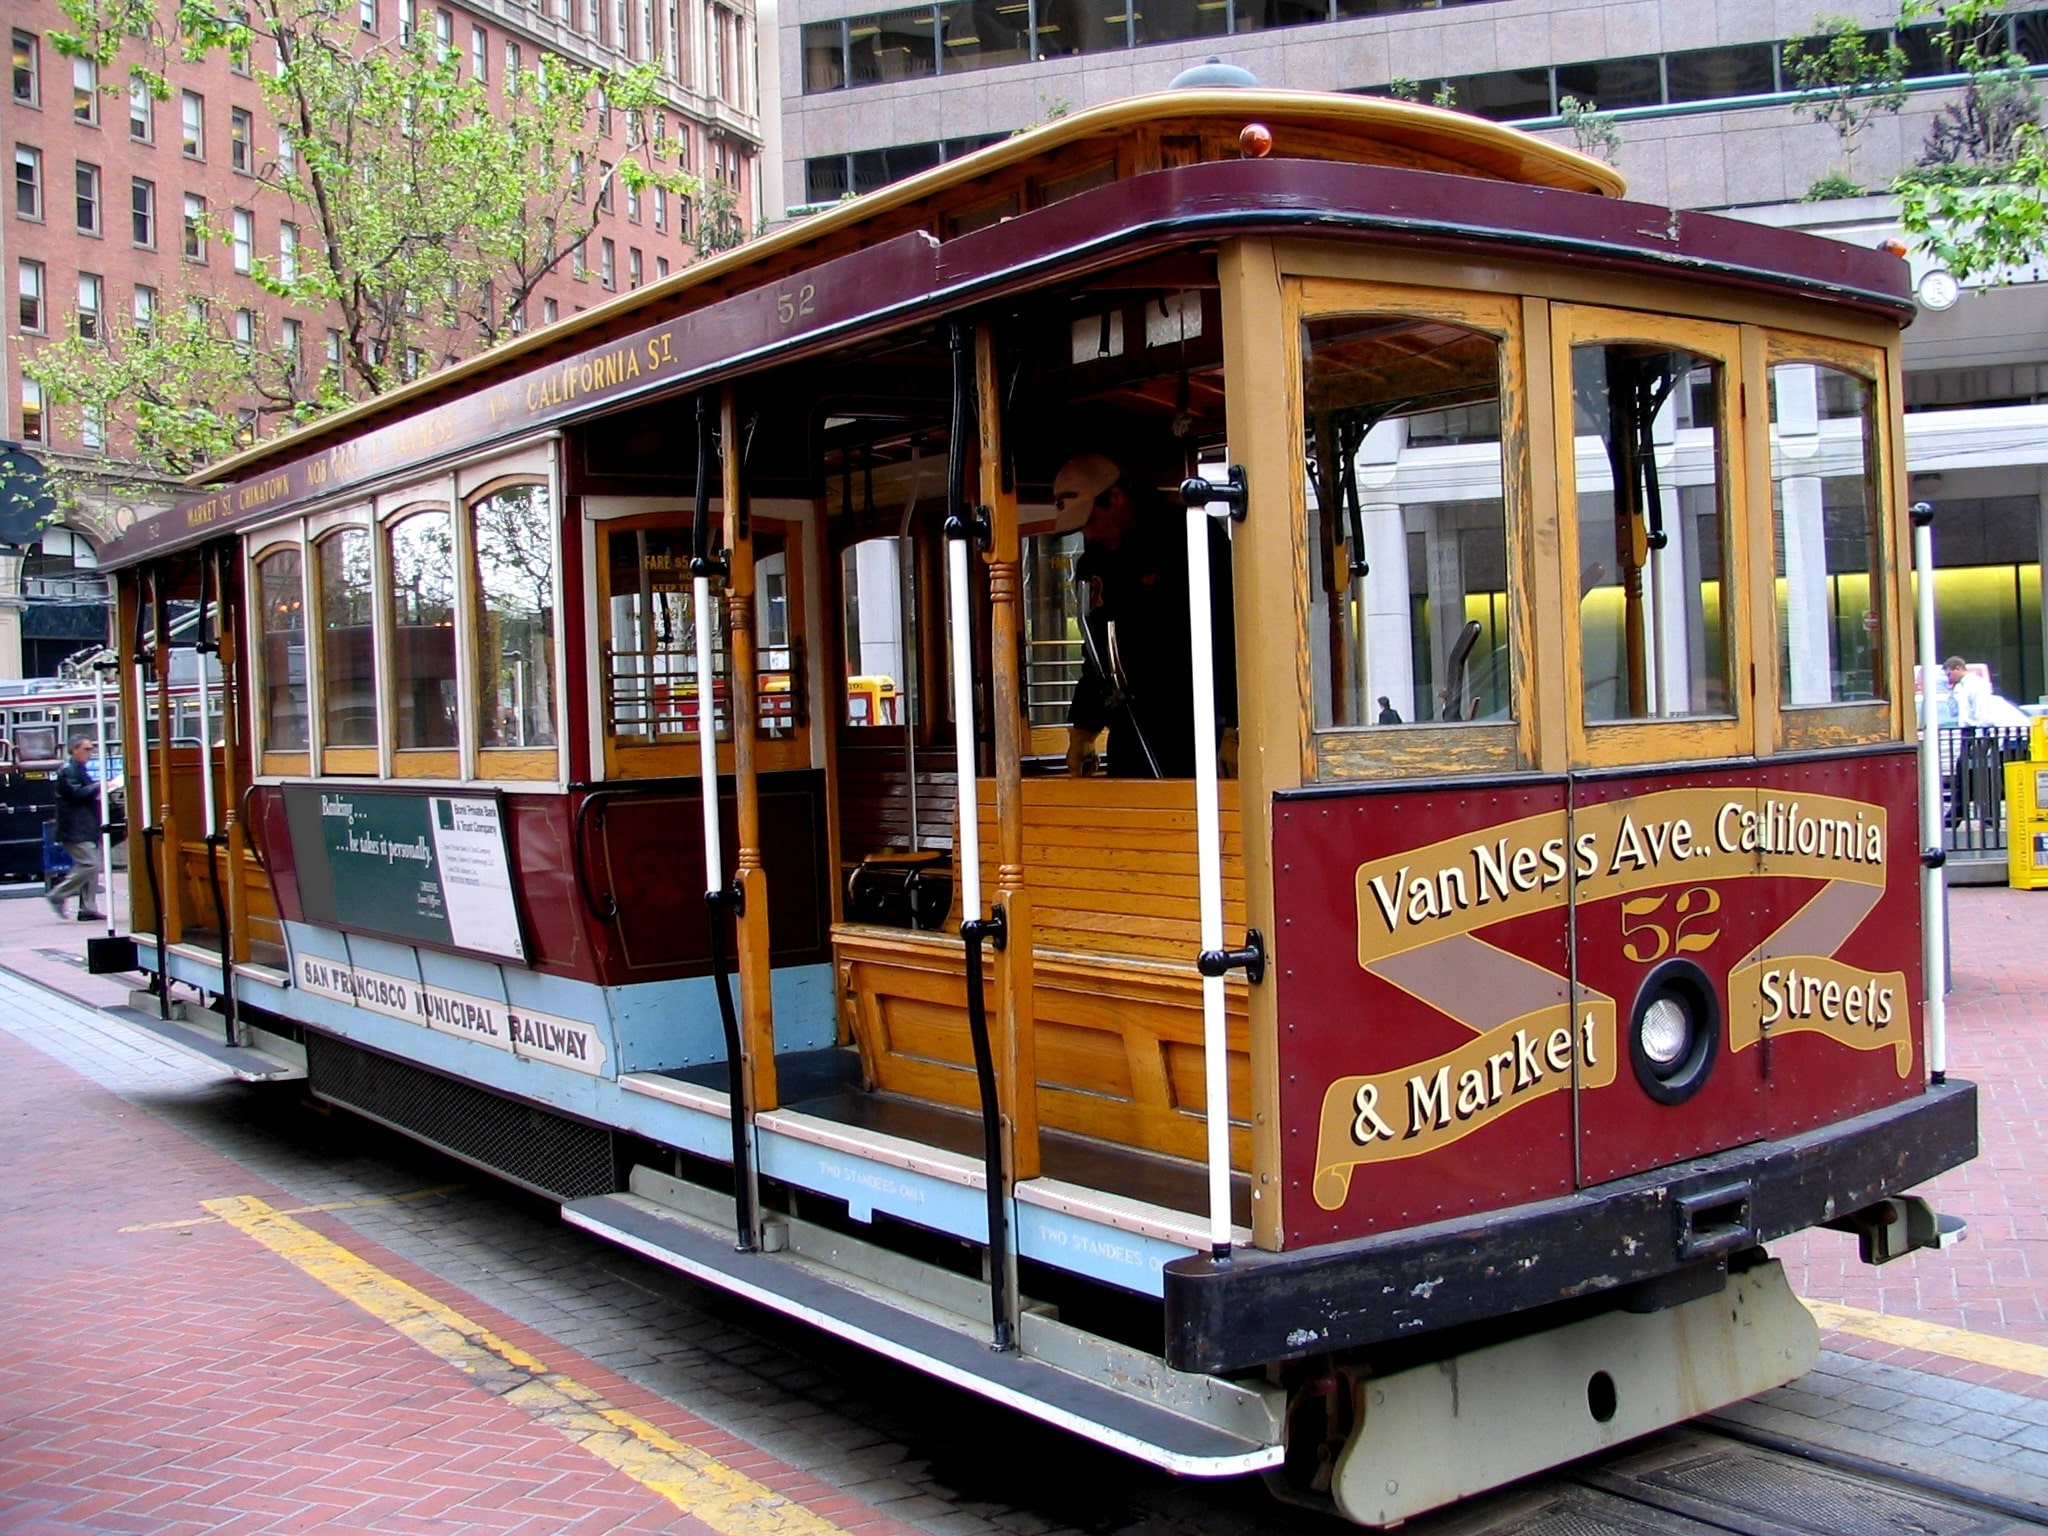 Van Ness and Market cable car in San Francisco, California.